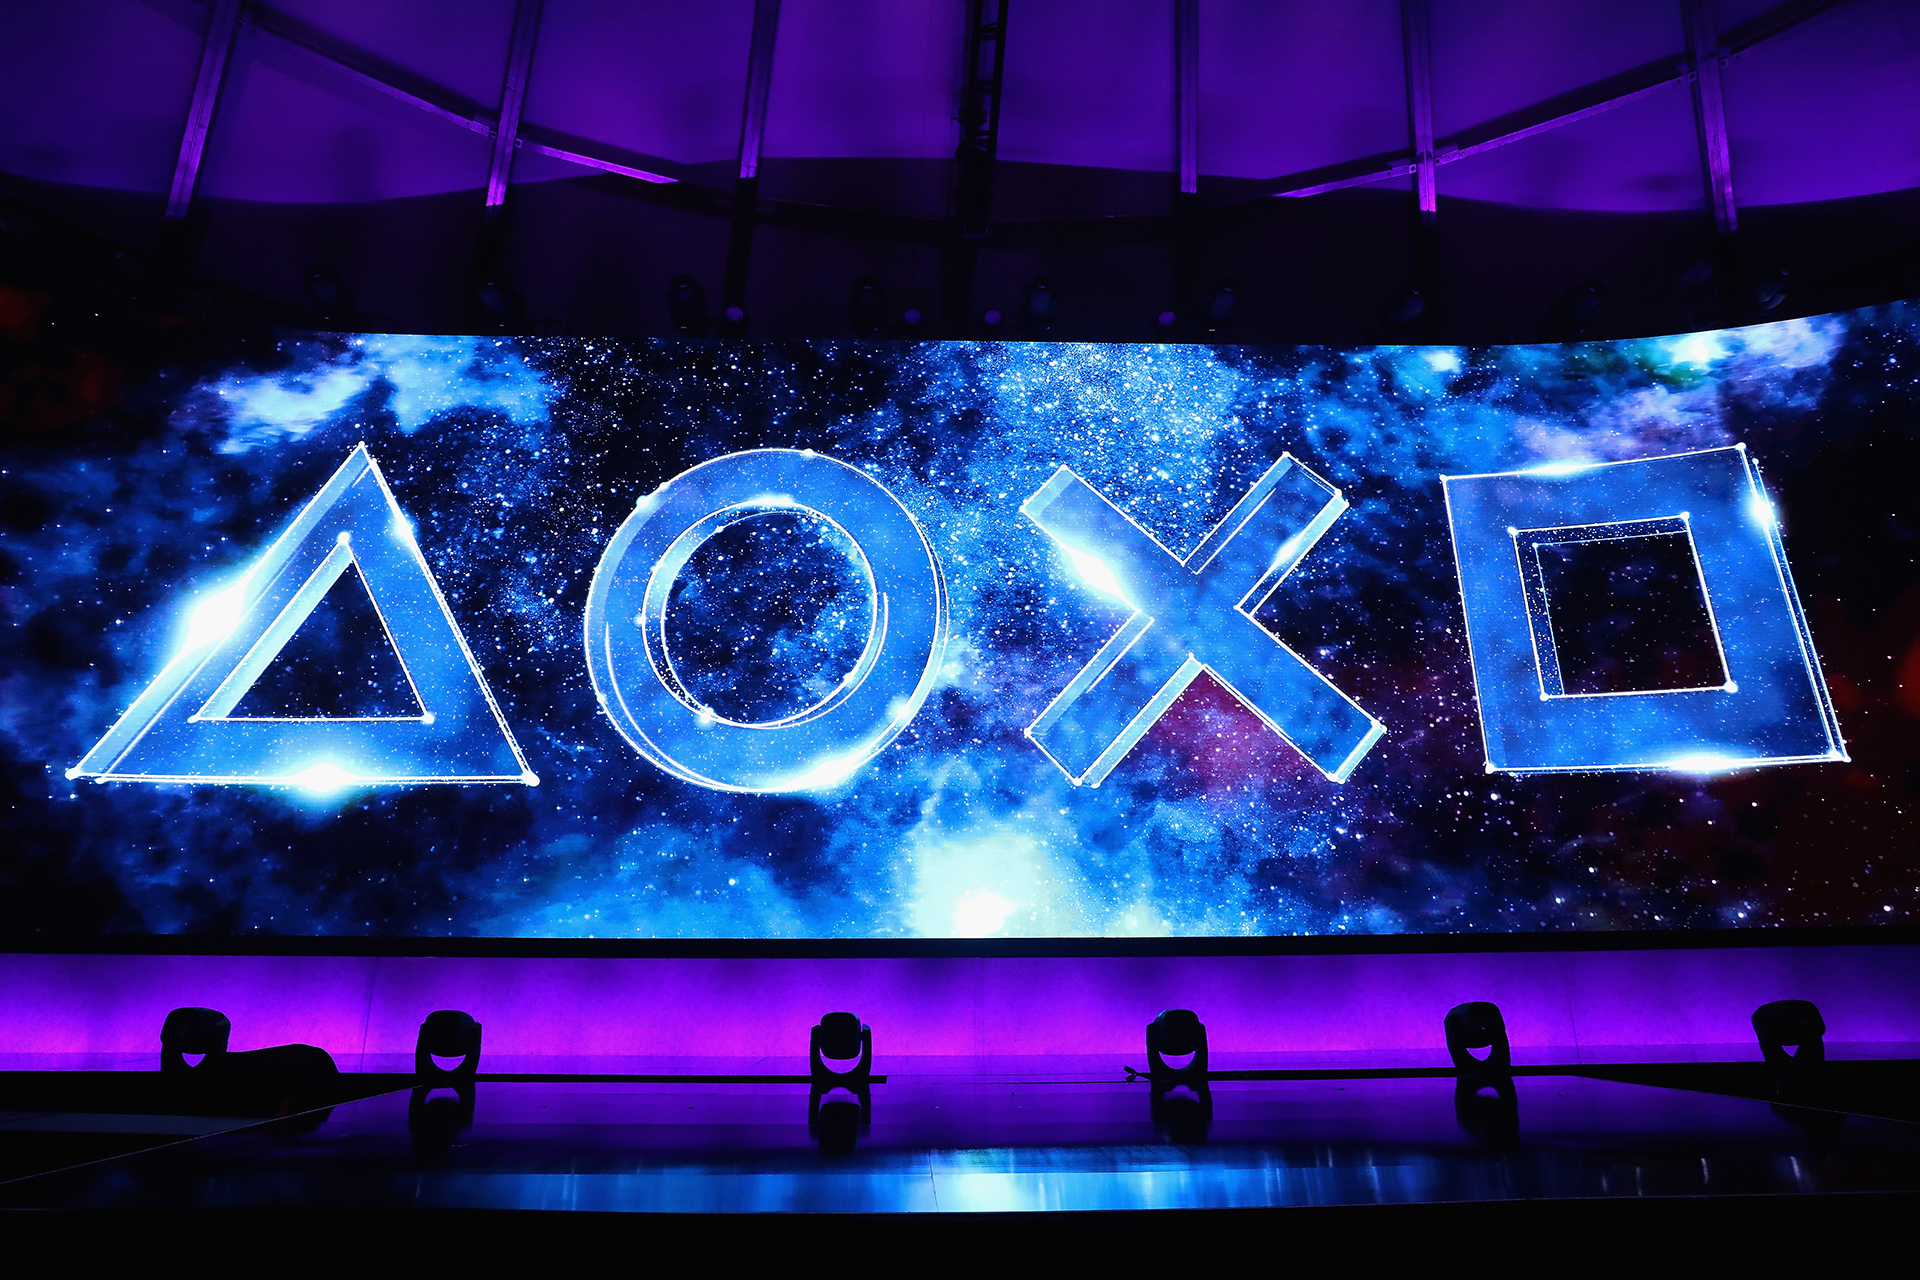 Sony Playstation logos are displayed during the Sony PlayStation E3 conference at LA Center Studios on June 11, 2018 in Los Angeles, California.